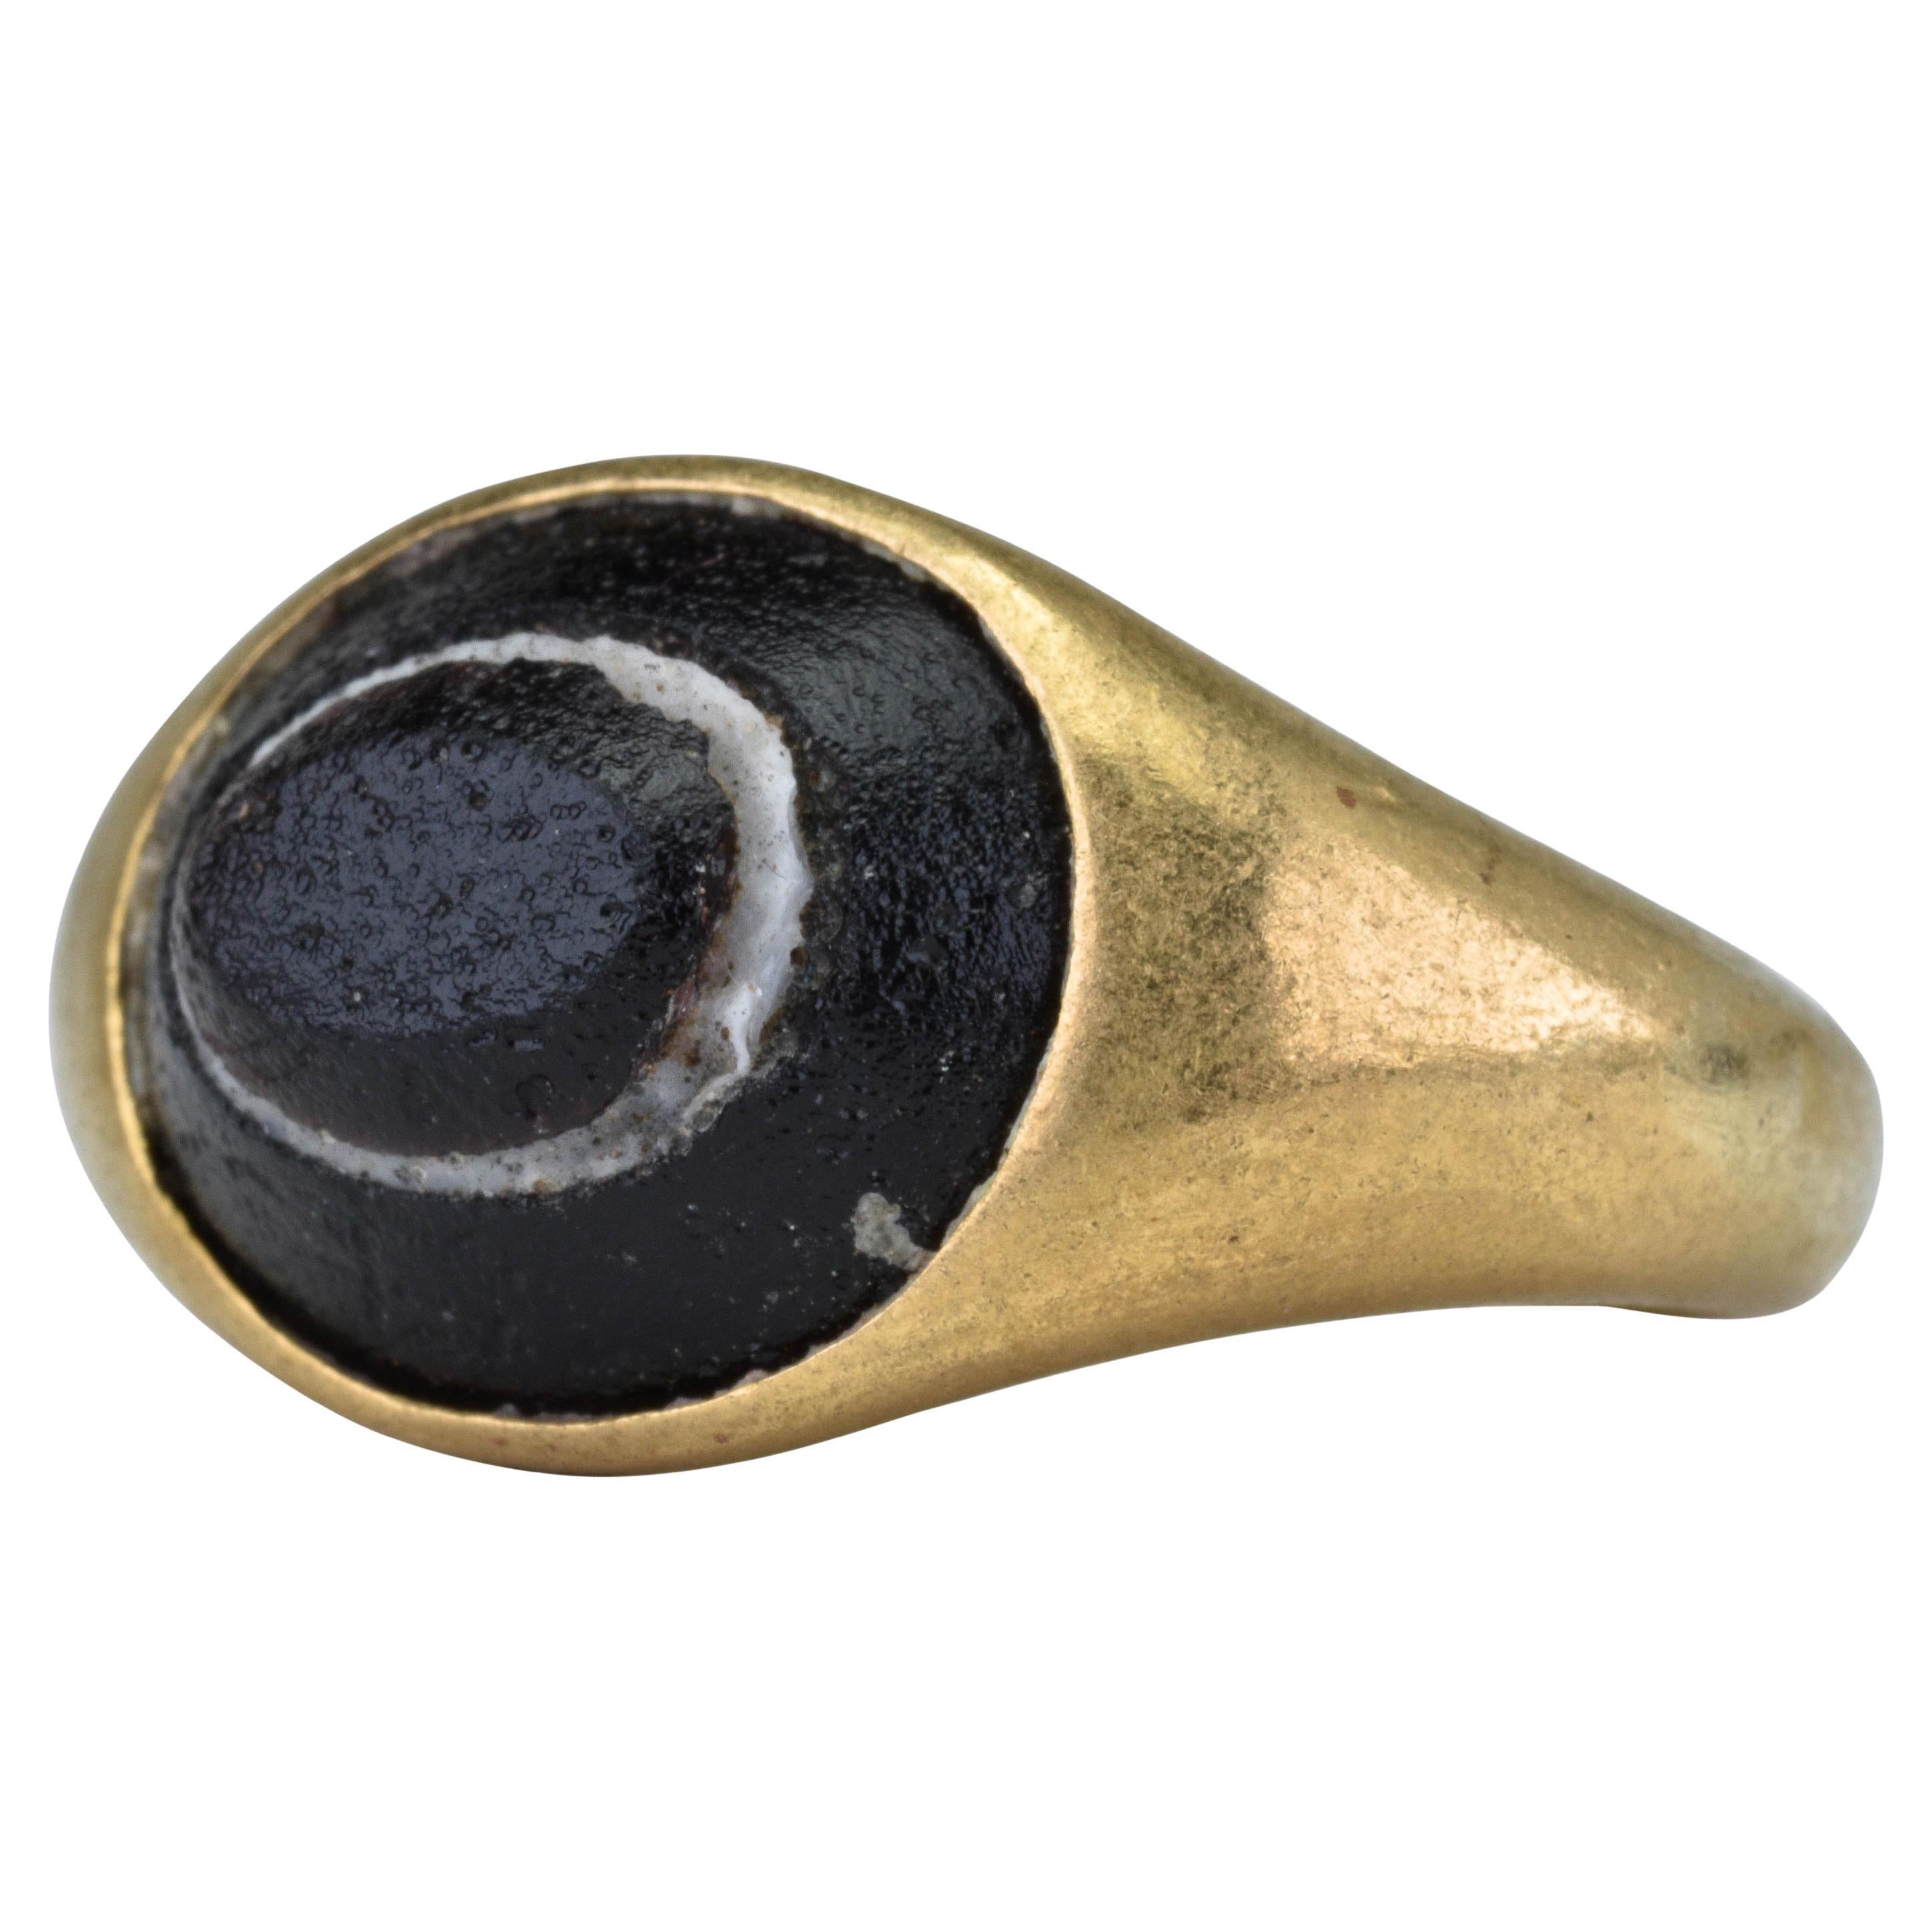 Ancient Roman Gold Signet Ring Inlaid with a Glass "Eye" Cabochon